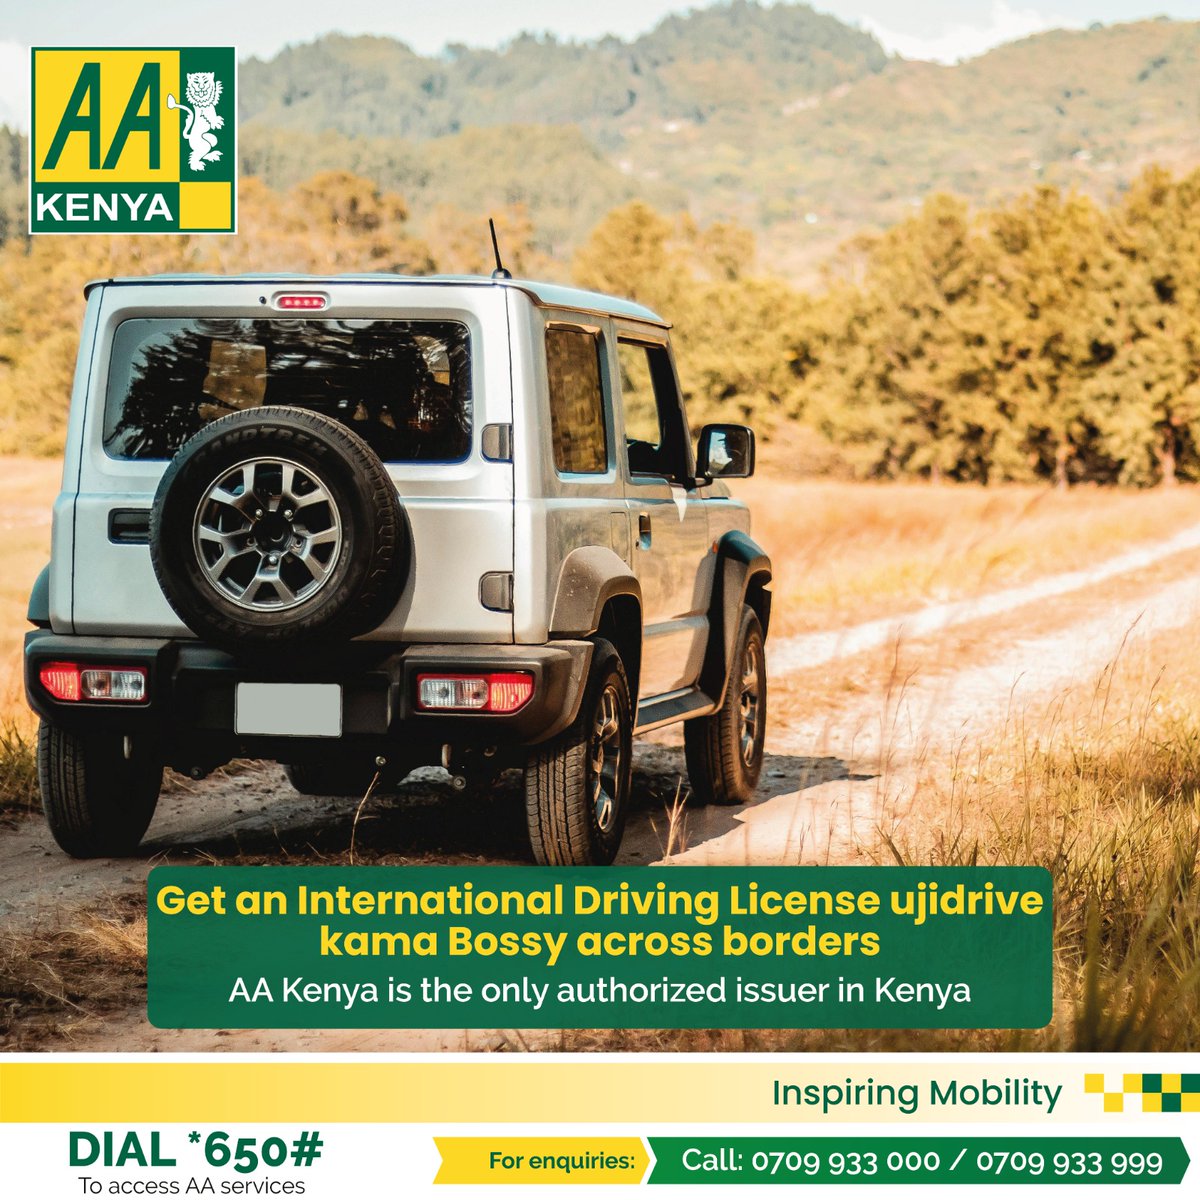 Enhance your travel experience with an International Driving License from AA Kenya. Drive with confidence in countries where a Kenyan license is not enough. Remember, AA Kenya is the only authorized issuer of the IDP in Kenya. For more info, call us on 0709933000/999